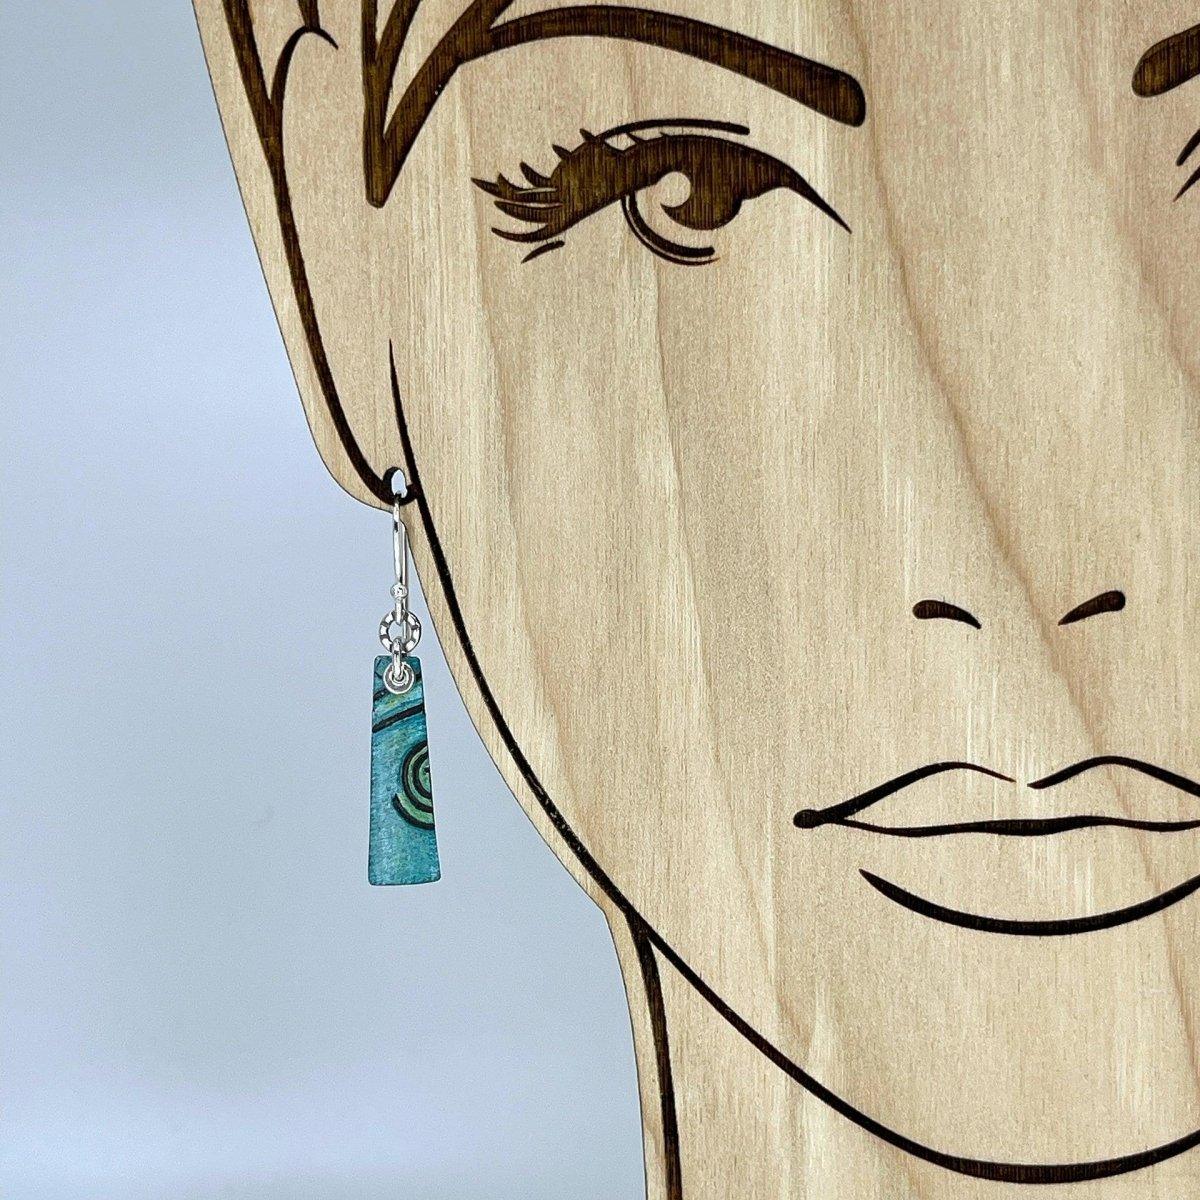 Aqua Copper Earrings with Sterling Silver Accents - Kristin Christopher